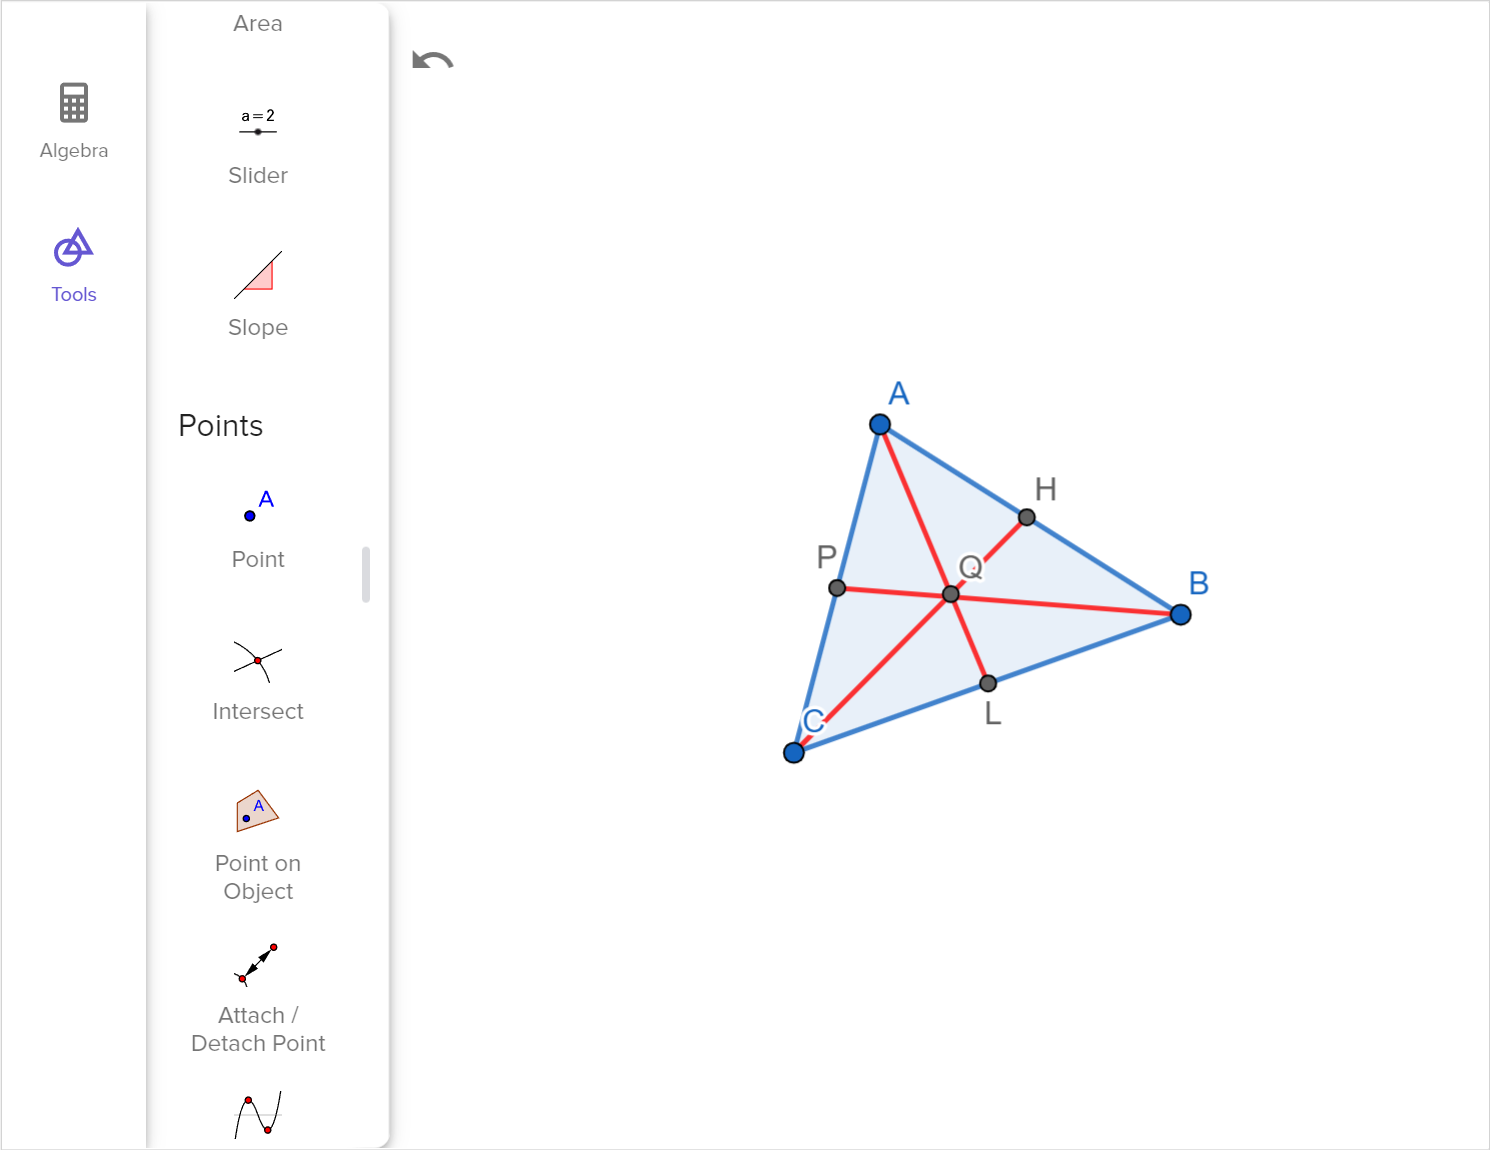 A screenshot of the GeoGebra geometry tool showing the centroid with the medians of triangle A B C. Speak to your teacher for more details.